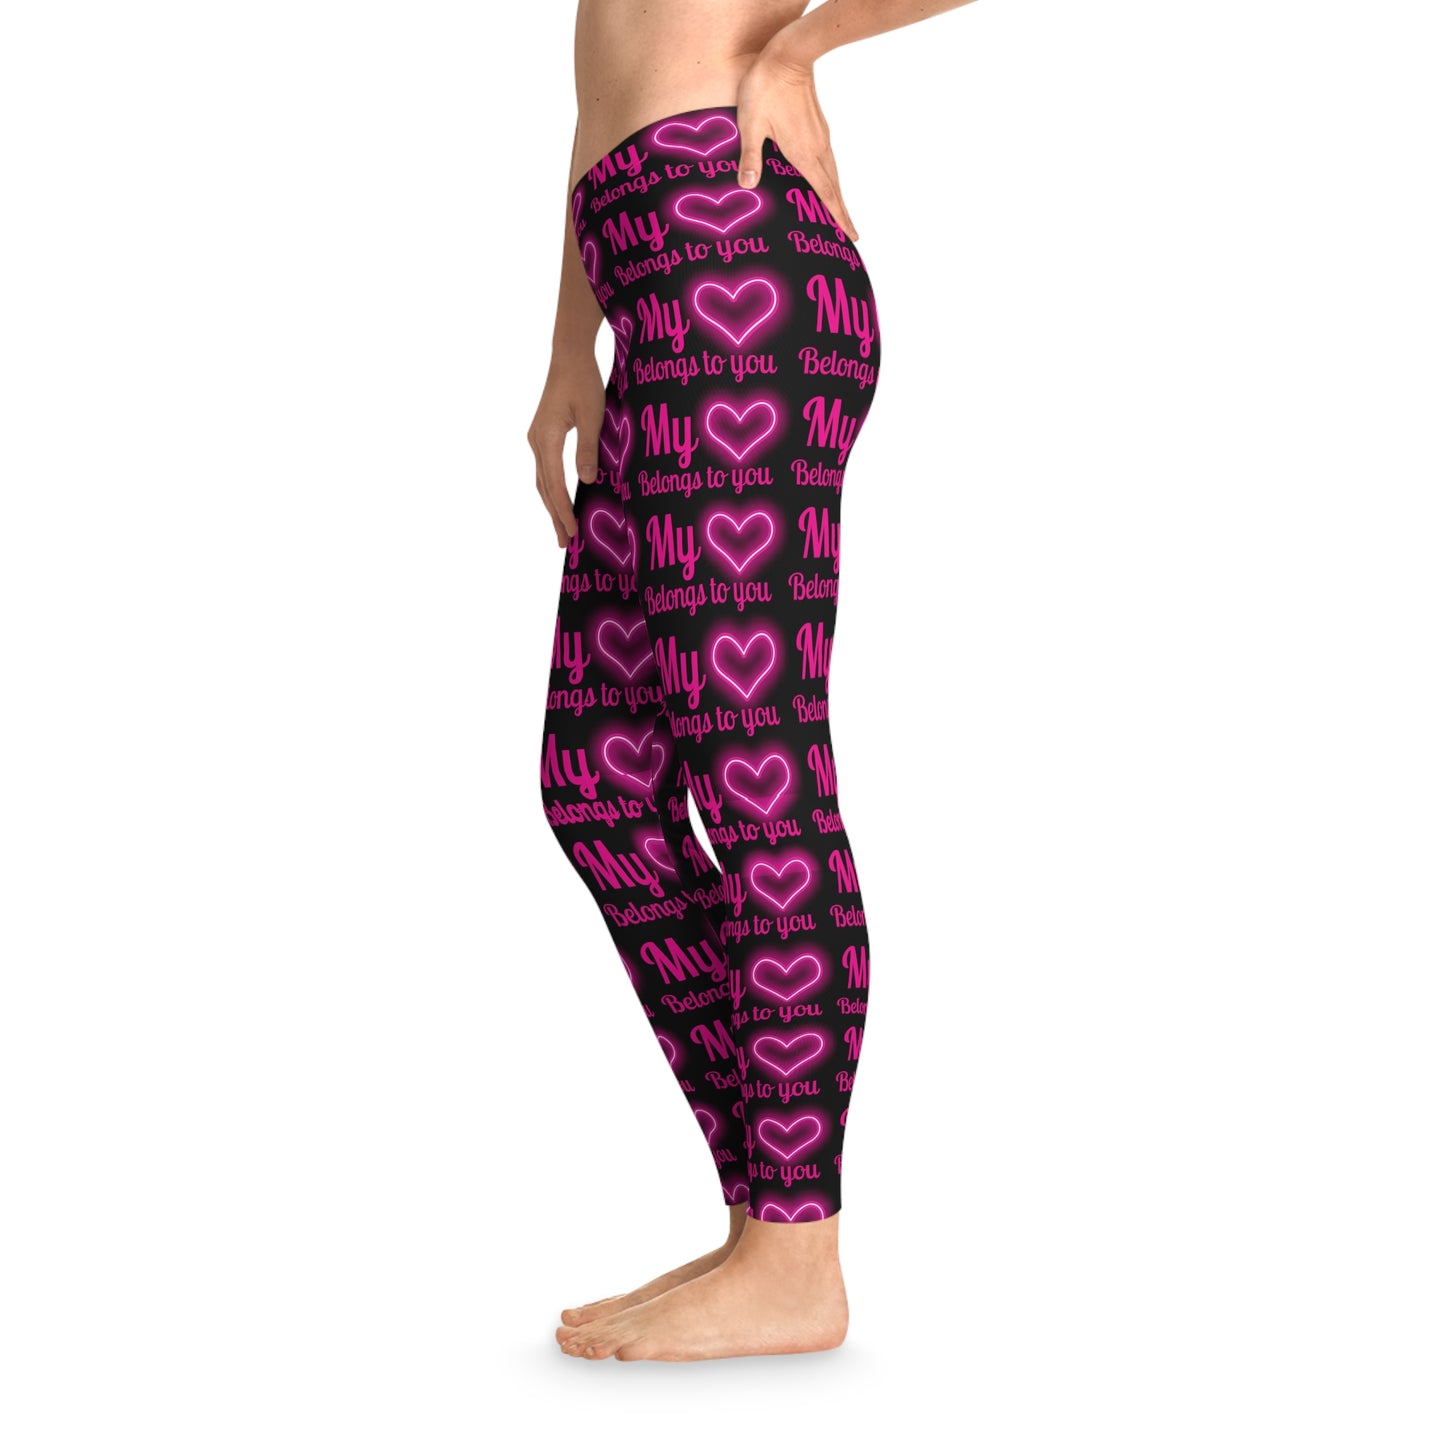 My Heart Belongs To You, Stretchy Leggings, Valentines Day Gift, Gift For Her, Black Leggings